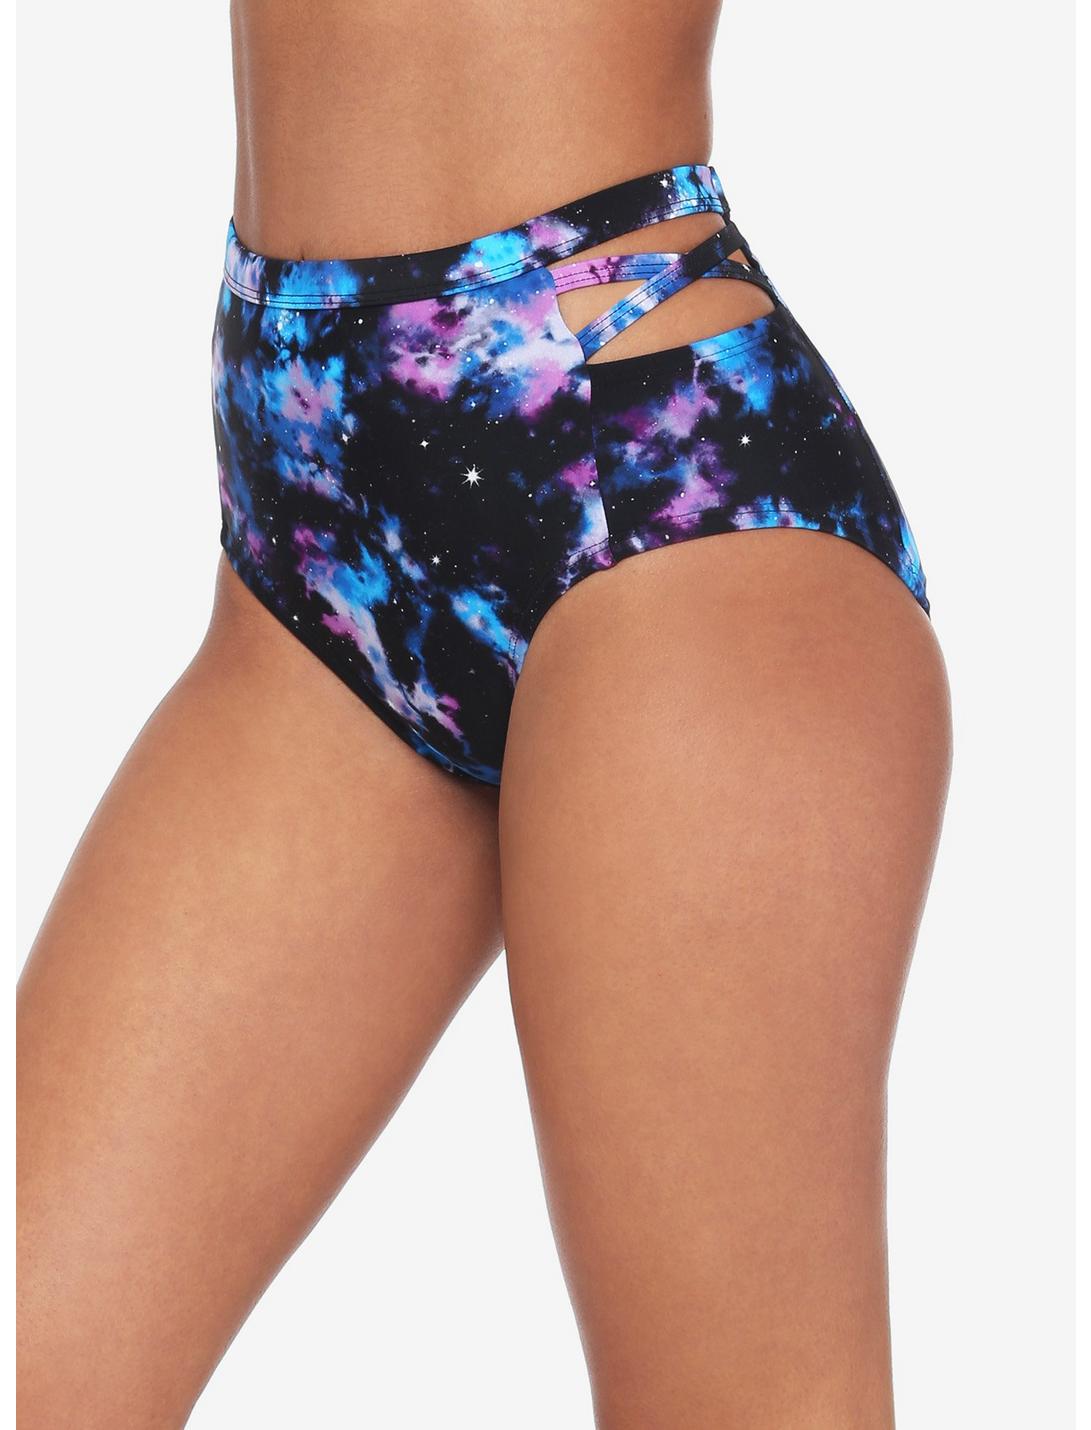 Galaxy Strappy High-Waisted Swim Bottoms, MULTI, hi-res